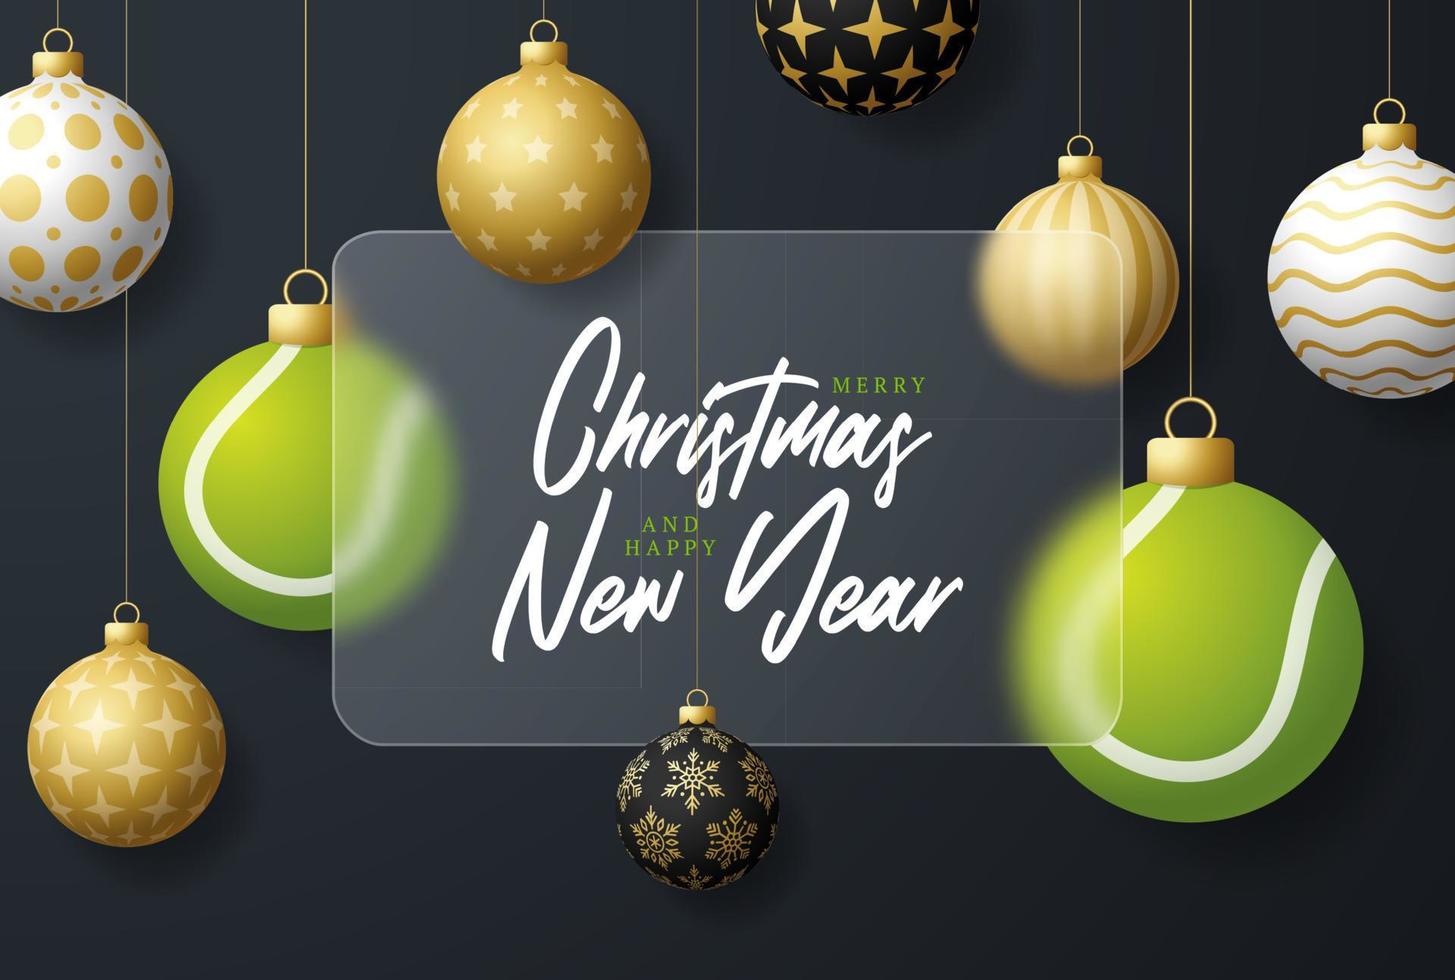 Tennis Christmas sale banner or greeting card. Merry Christmas and happy new year sport banner with glassmorphism or glass-morphism blur effect. Realistic vector illustration